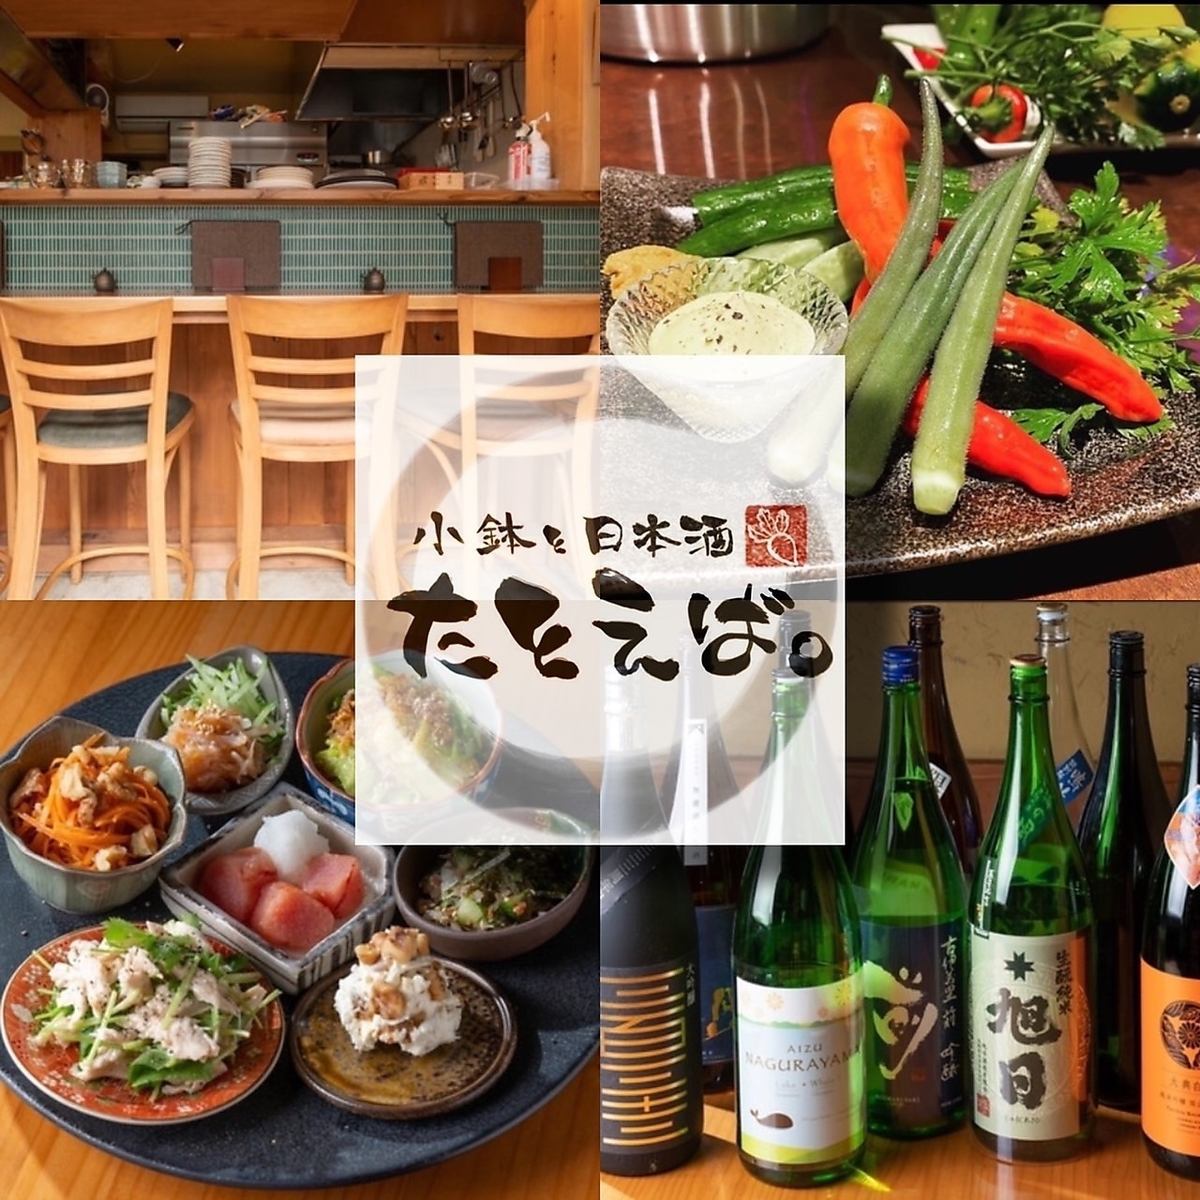 Nishiogikubo / Izakaya / All-you-can-drink / Lunch / Dinner / Banquet / Course / Japanese food / Sake / Second party / Women's association / Side dish